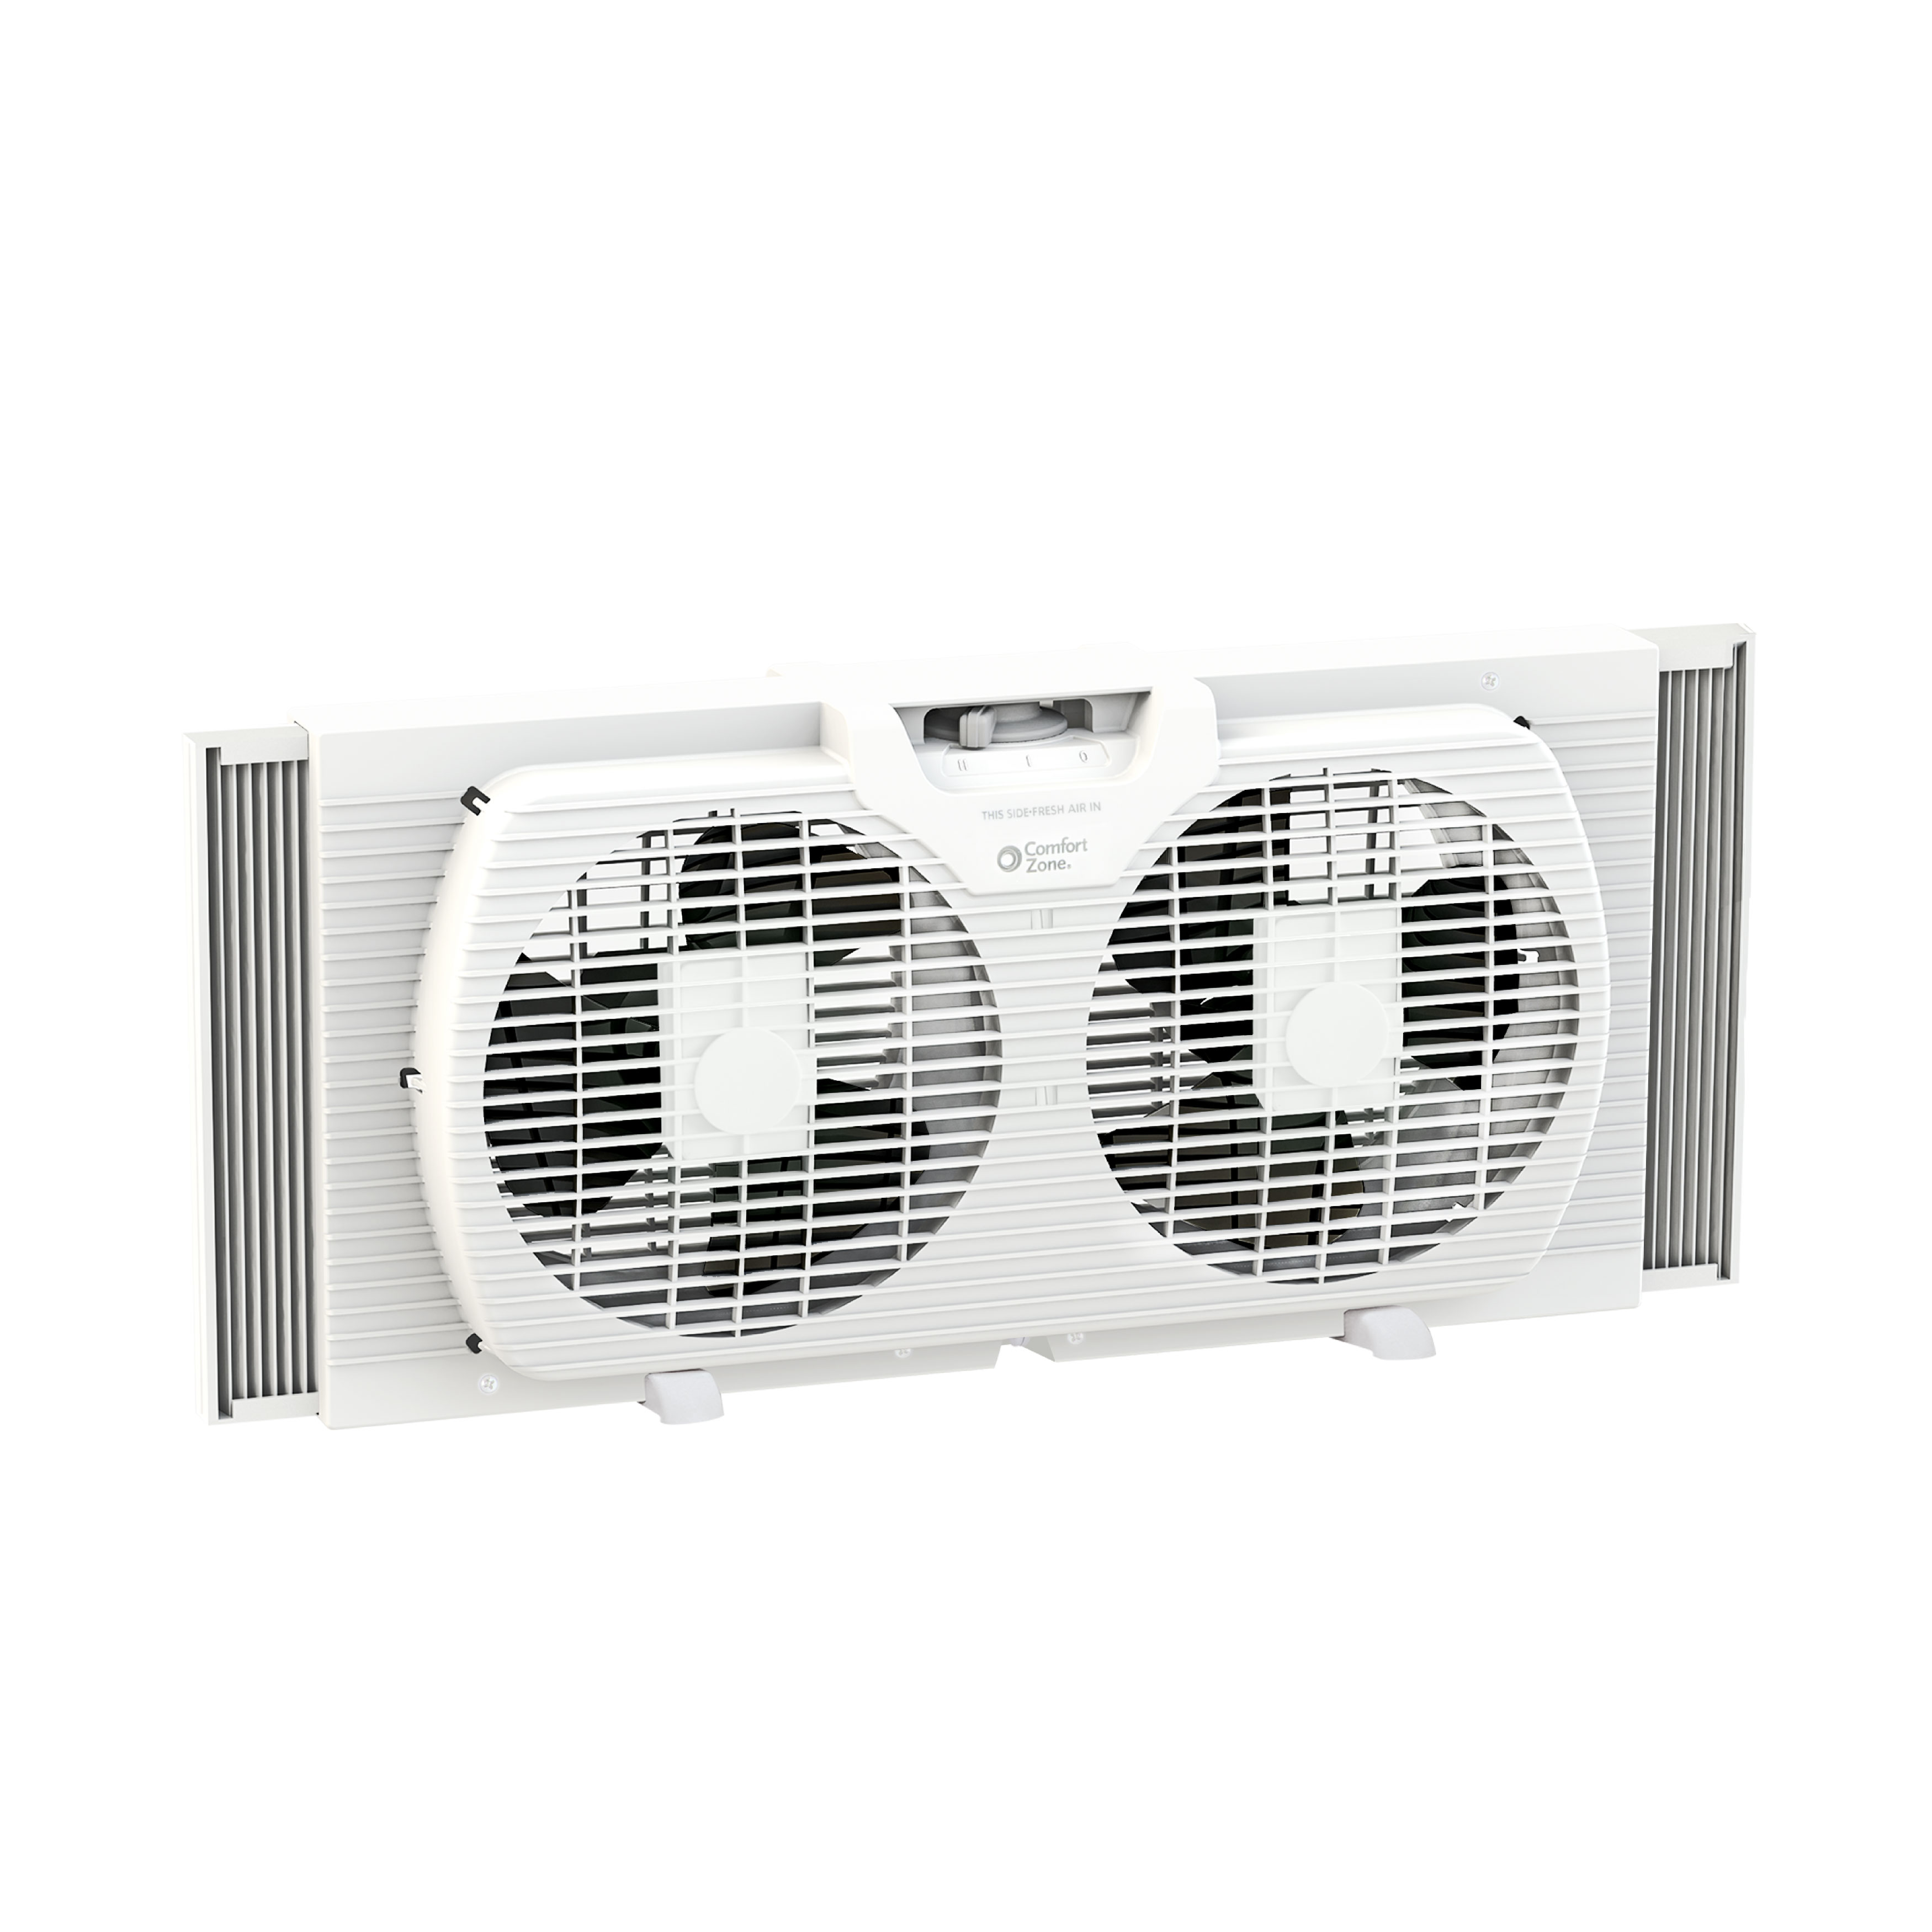 Comfort Zone 9" Twin Window Fan with Reversible Airflow Control, Auto-Locking Expanders and 2-Speed Fan Switch, White - image 1 of 7